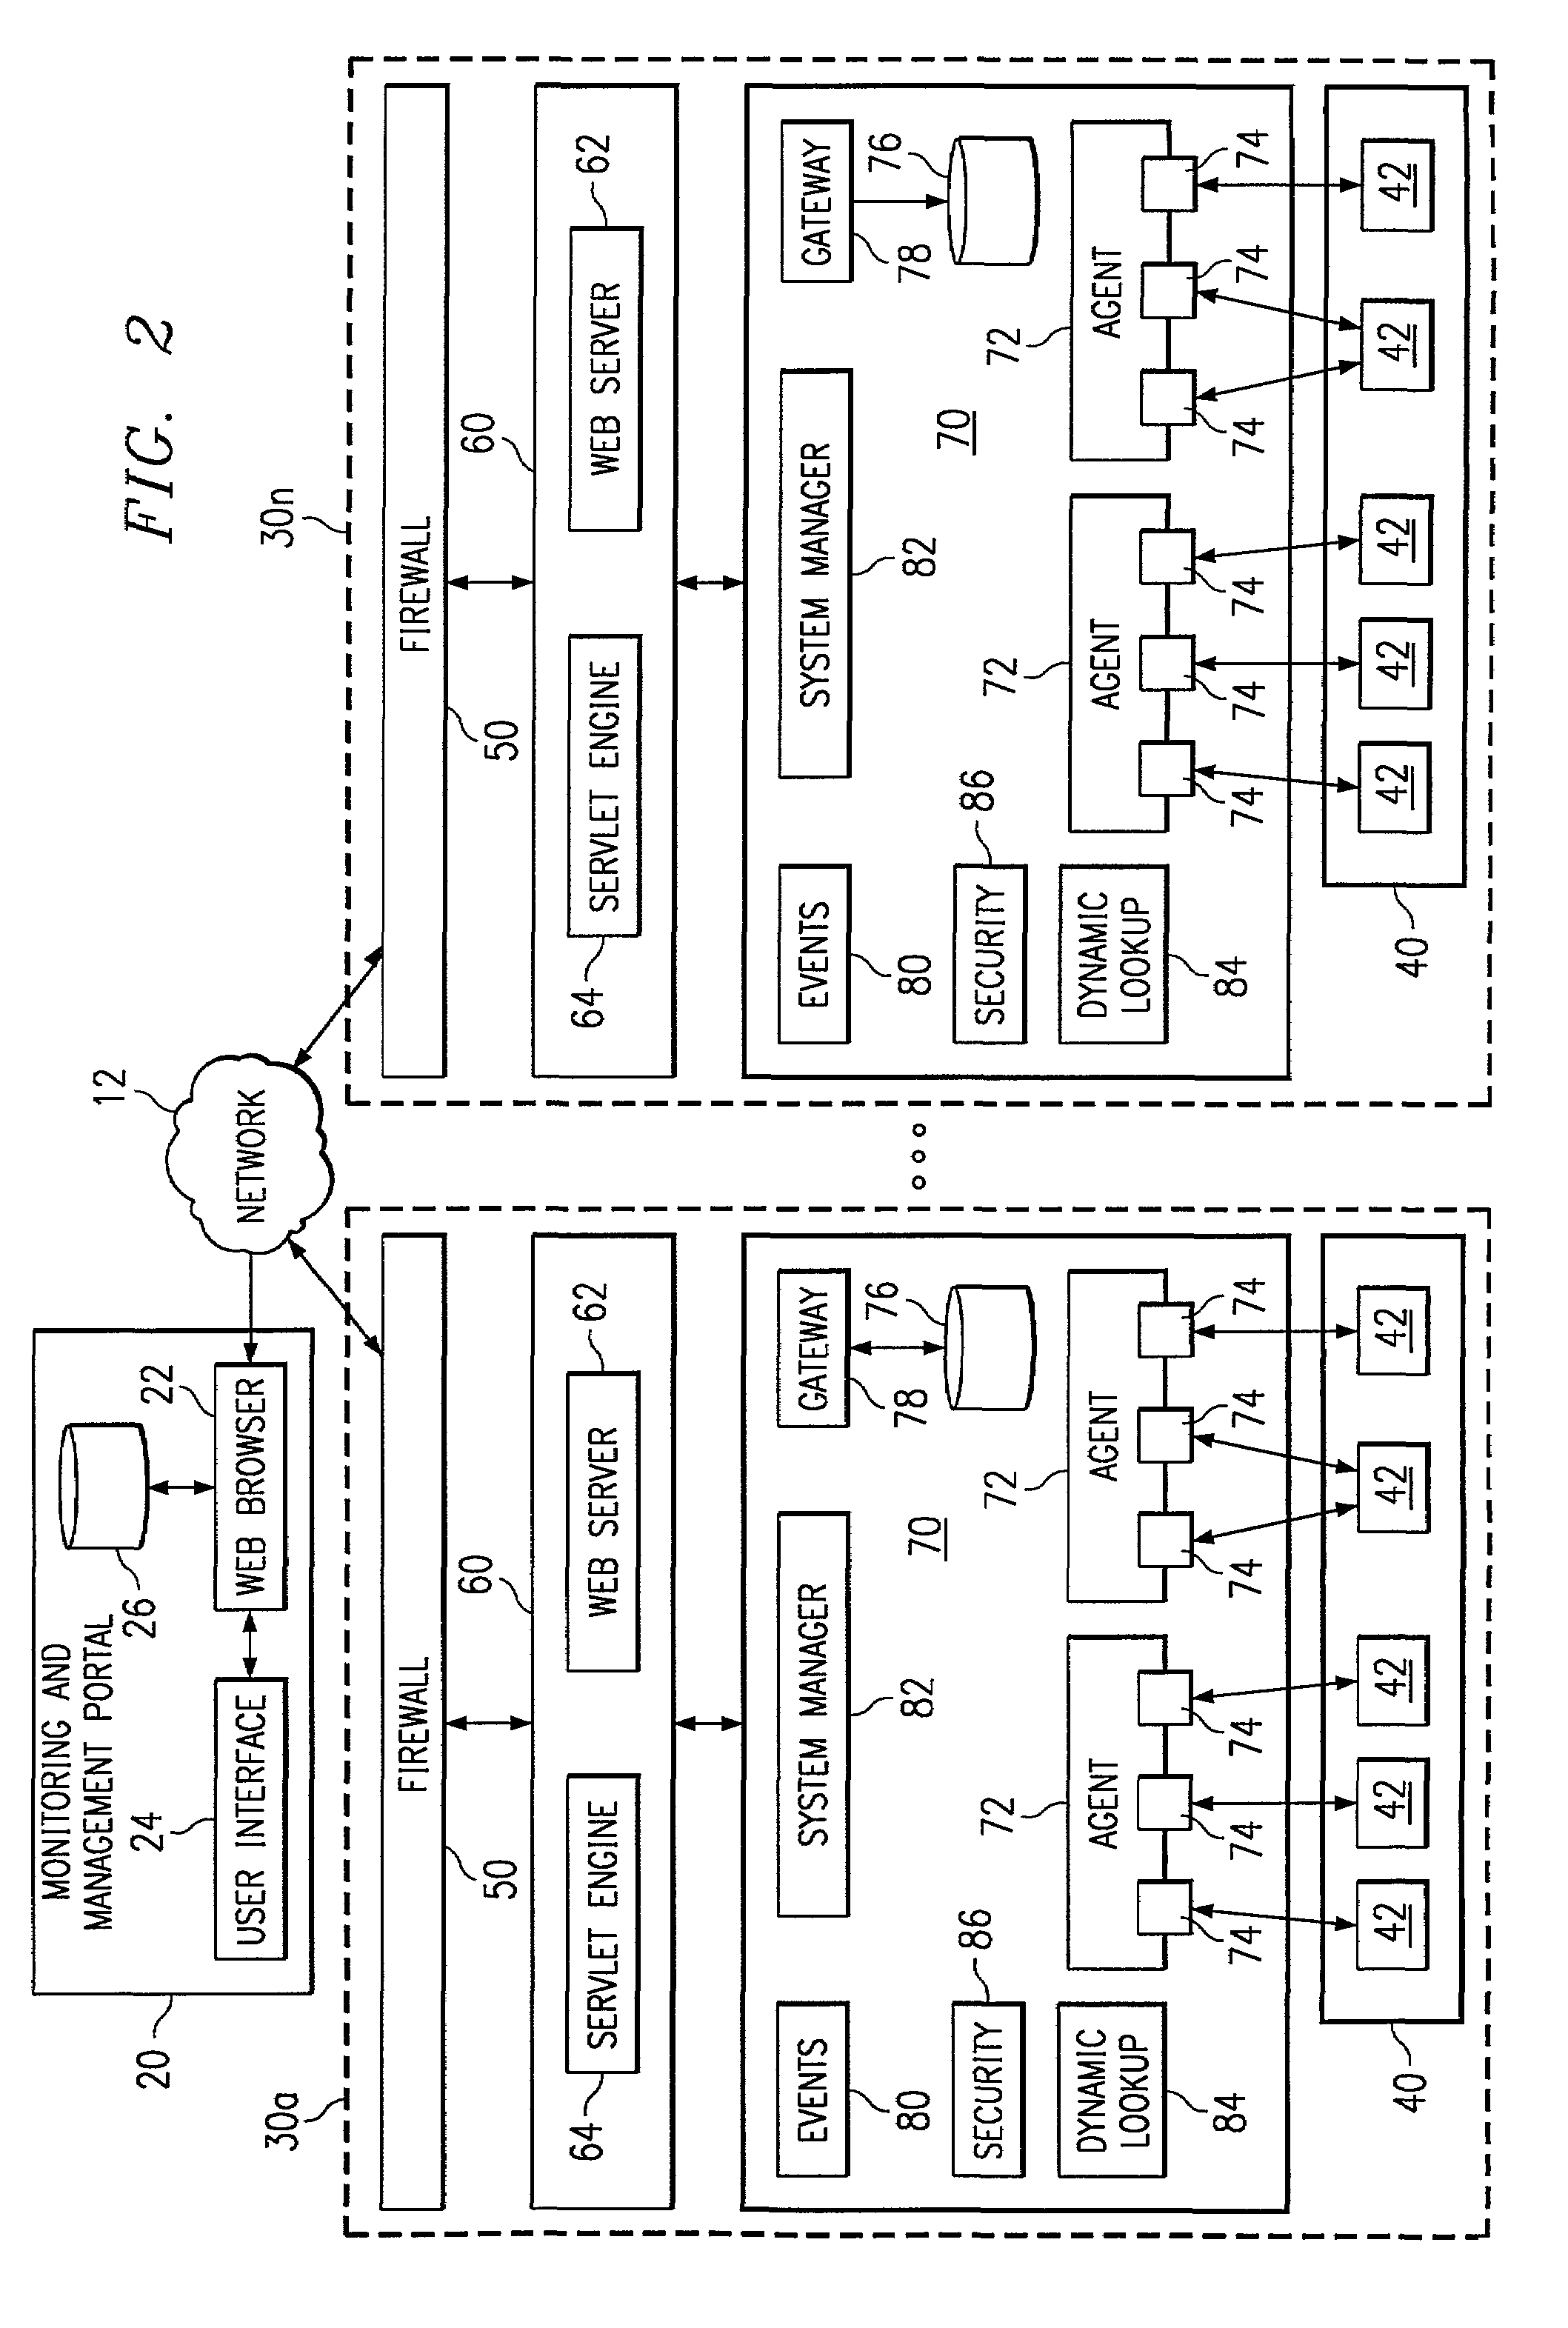 System and method for remotely monitoring and managing applications across multiple domains